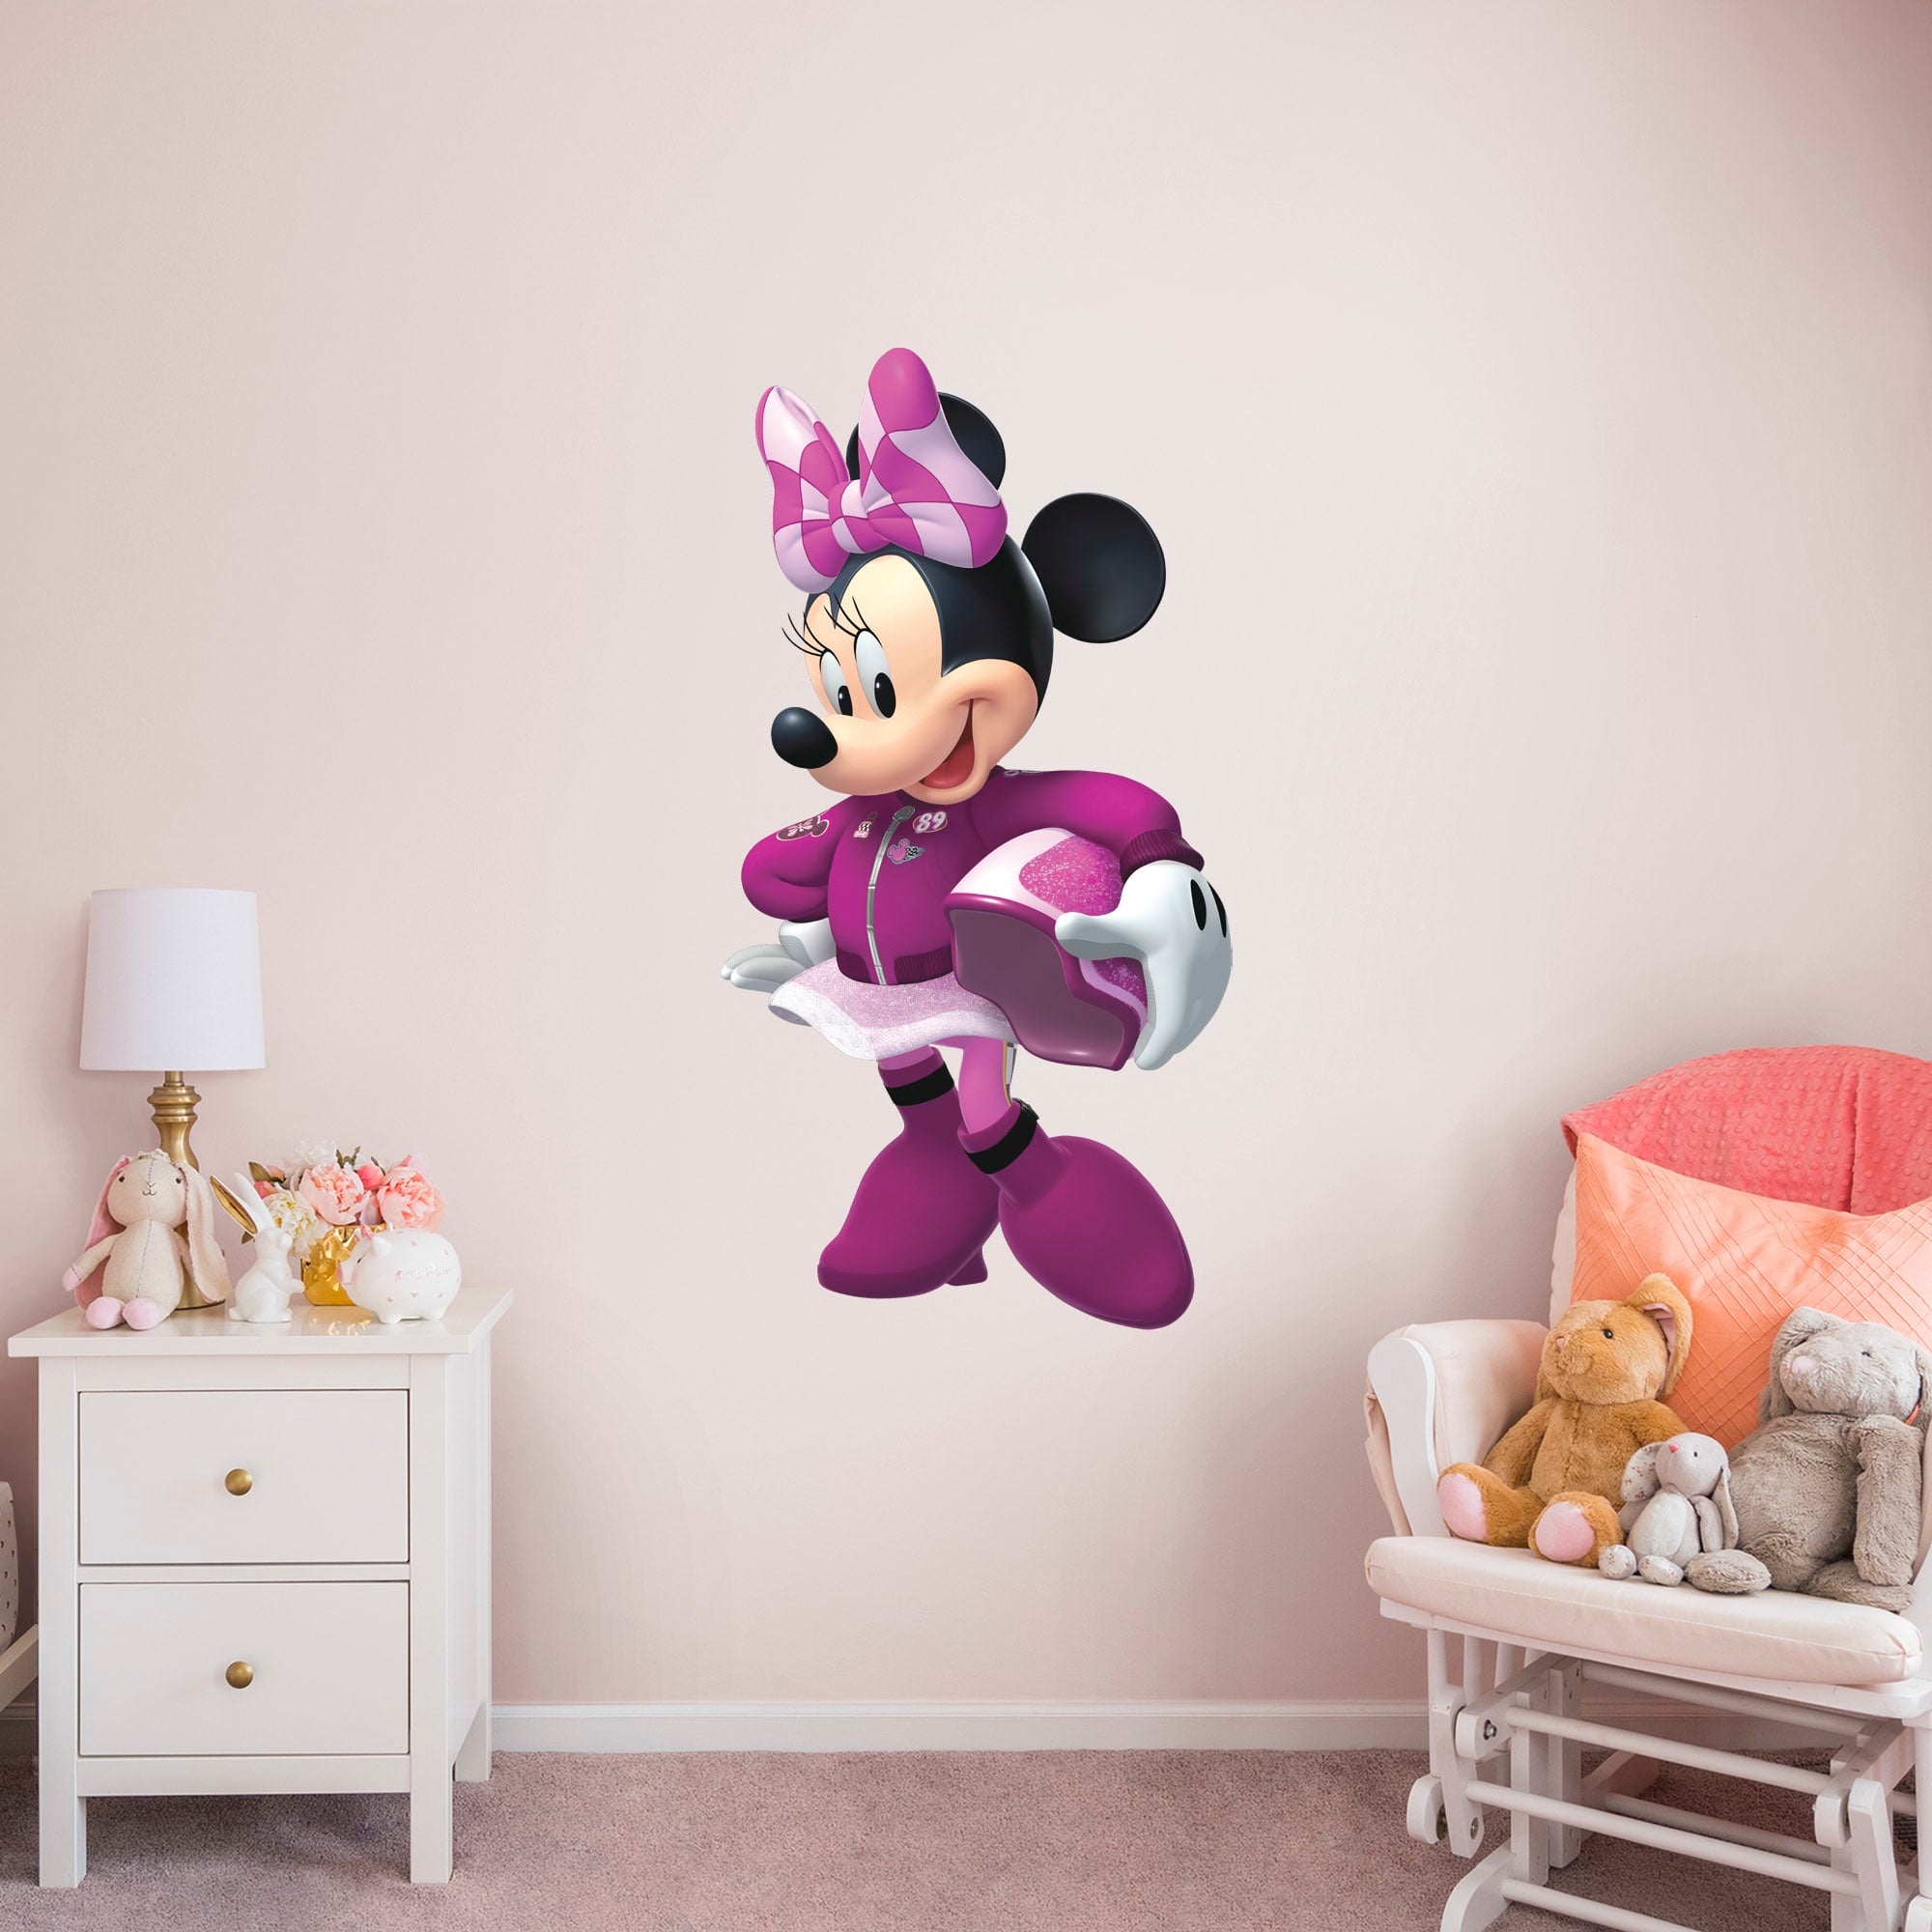 Mickey and the Roadster Racers: Minnie Mouse - Officially Licensed Disney Removable Wall Decal Giant Character + 2 Decals (26.5"